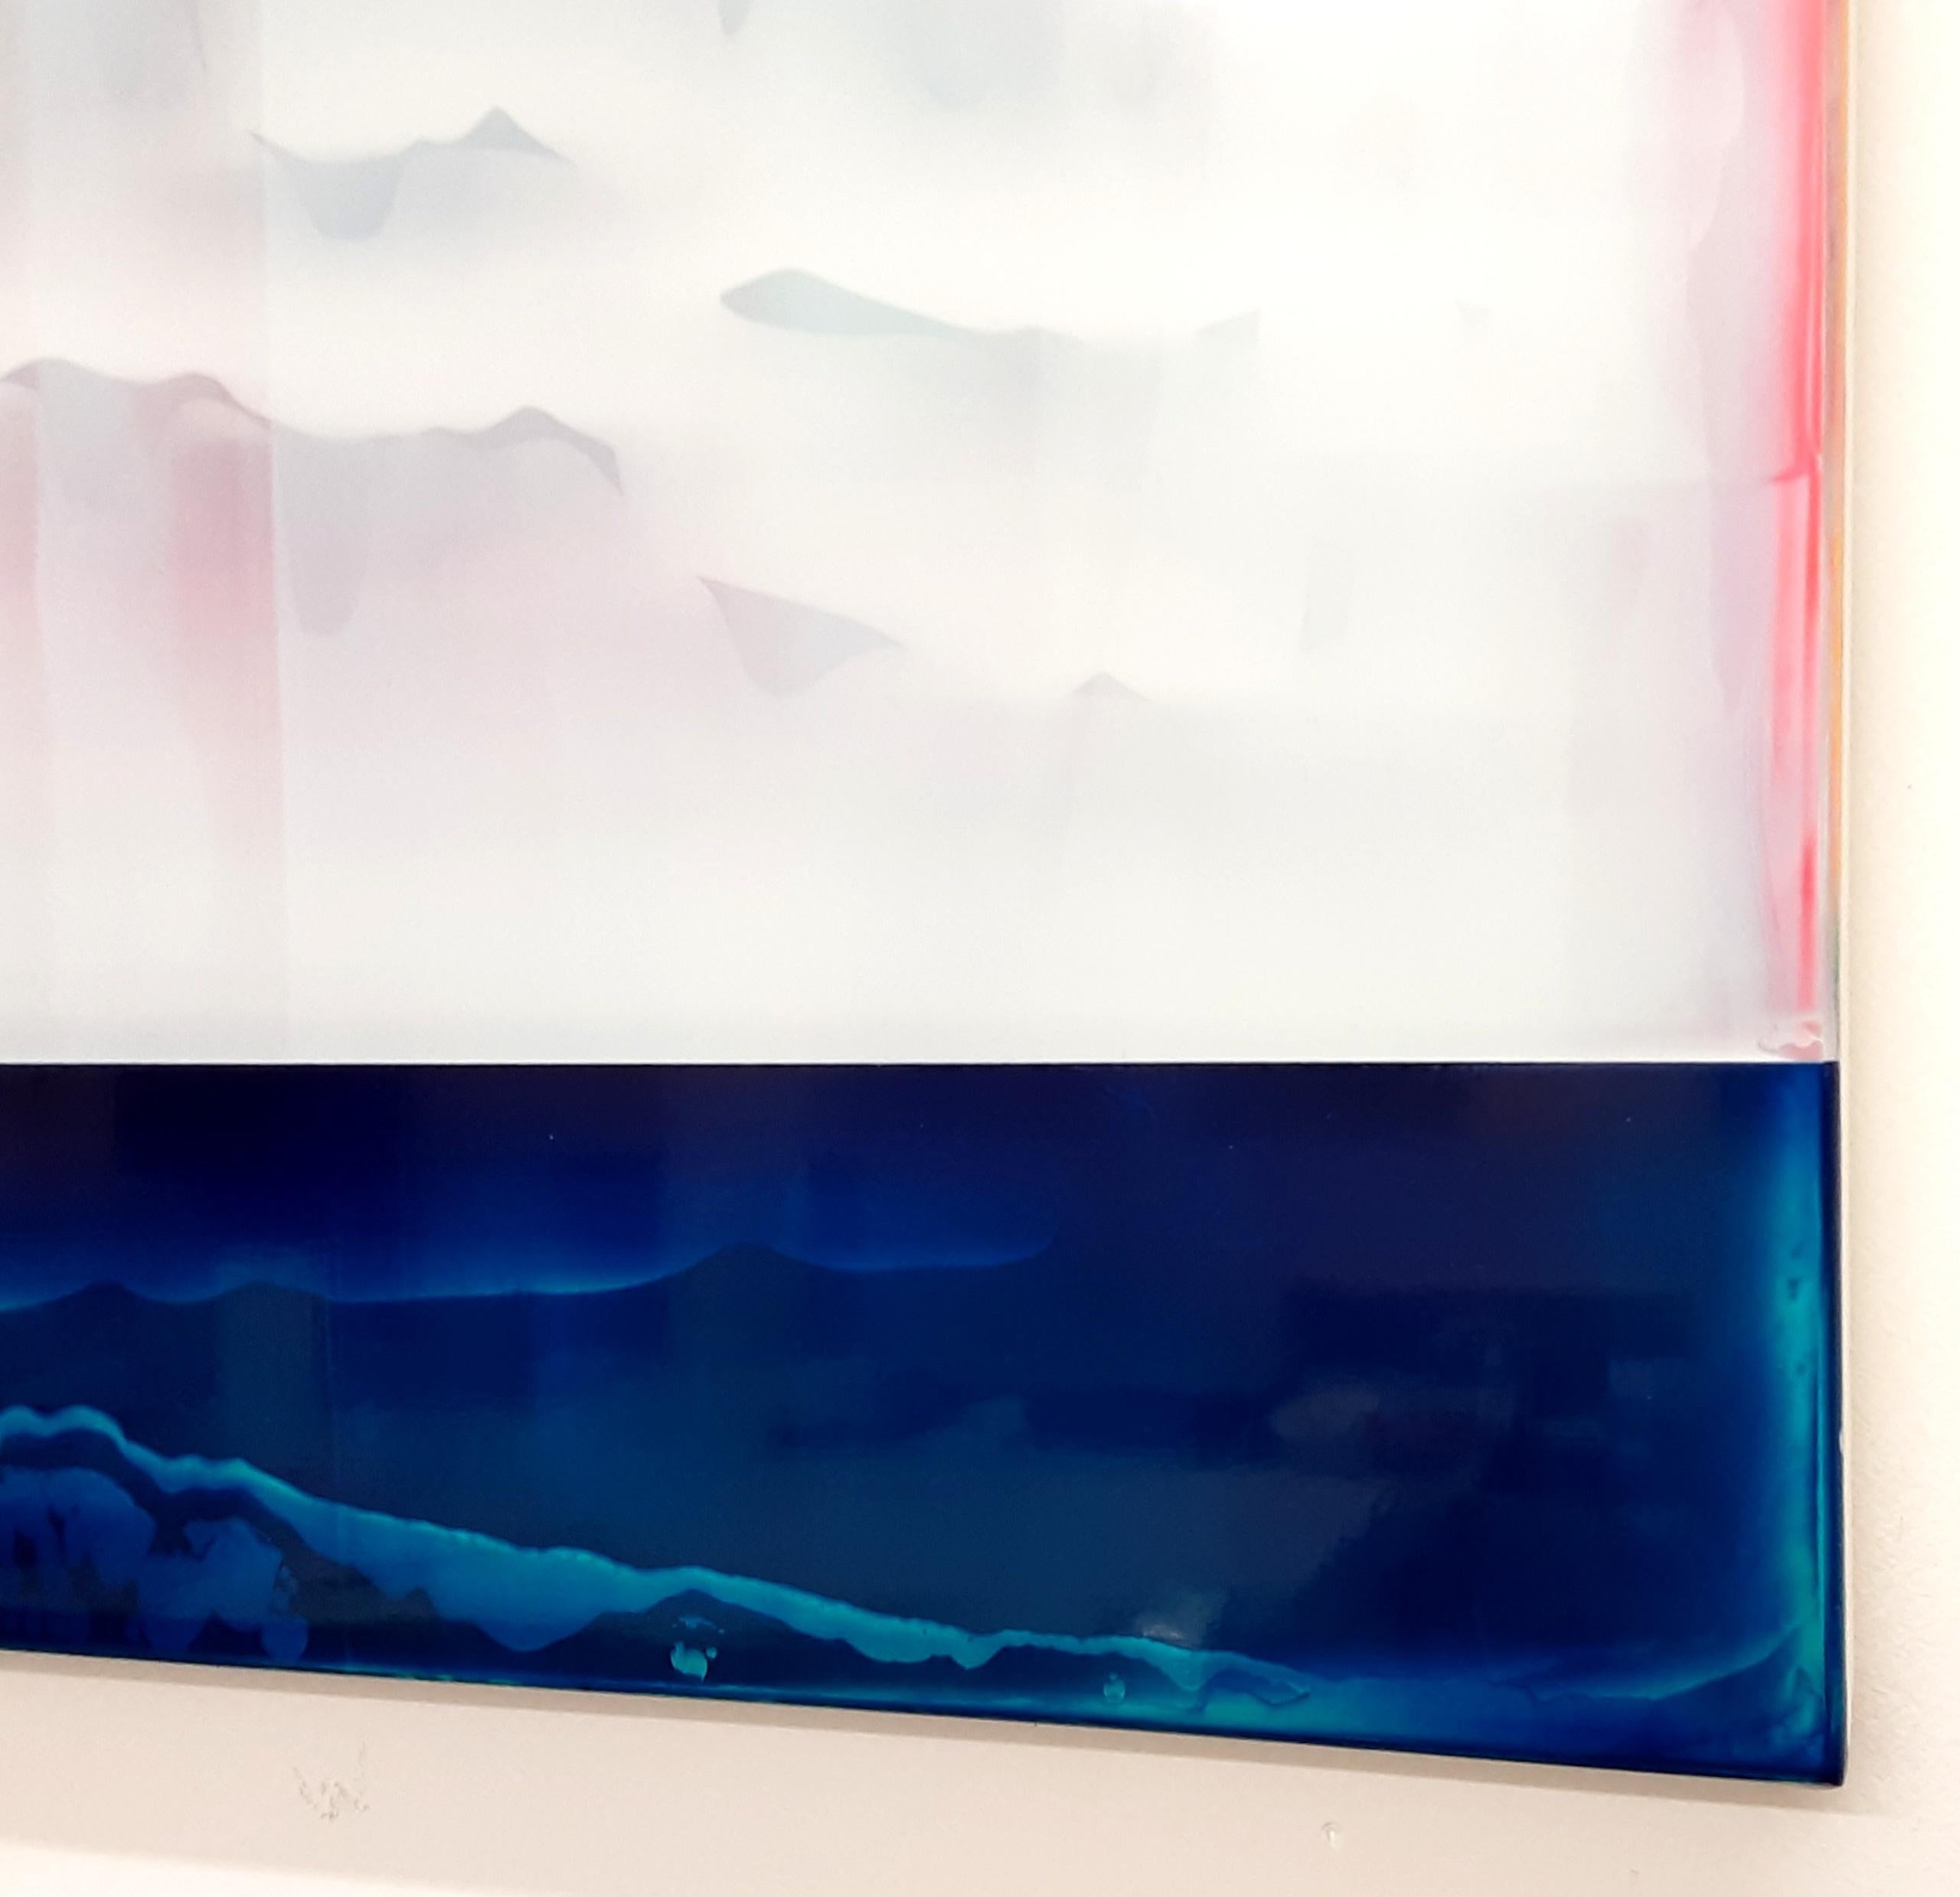 Lucent (4/19) by James Lumsden - Abstract colour painting, pink and light blue For Sale 7